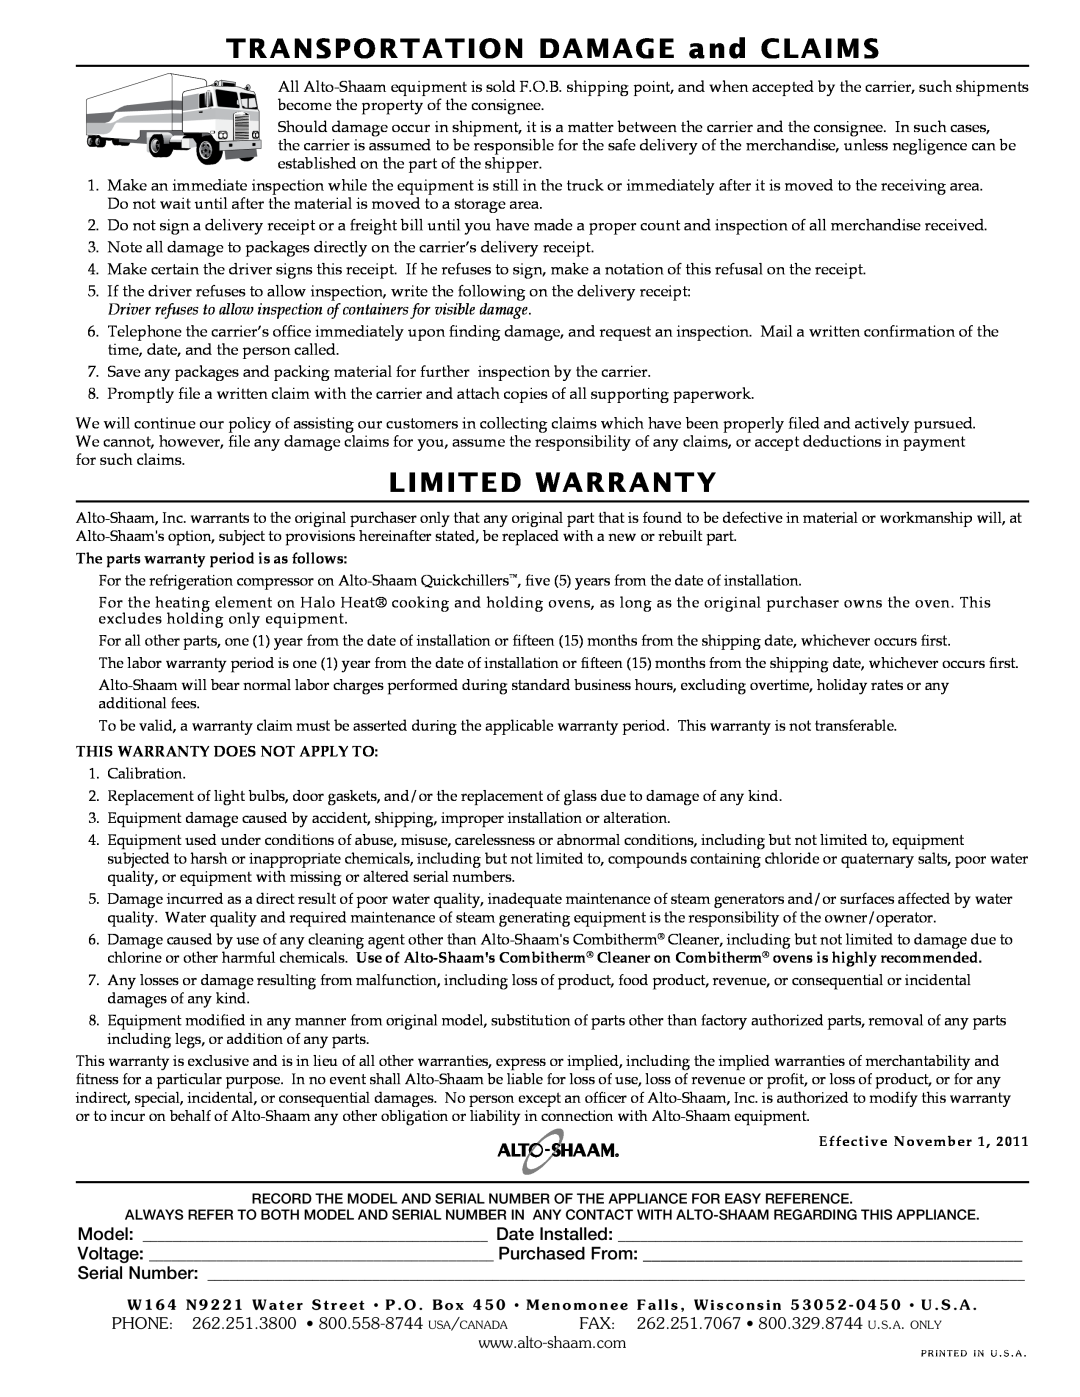 Alto-Shaam 300-TH/III manual transPortatIon DaMaGe and claIMs, lIMIteD WarrantY, The parts warranty period is as follows 